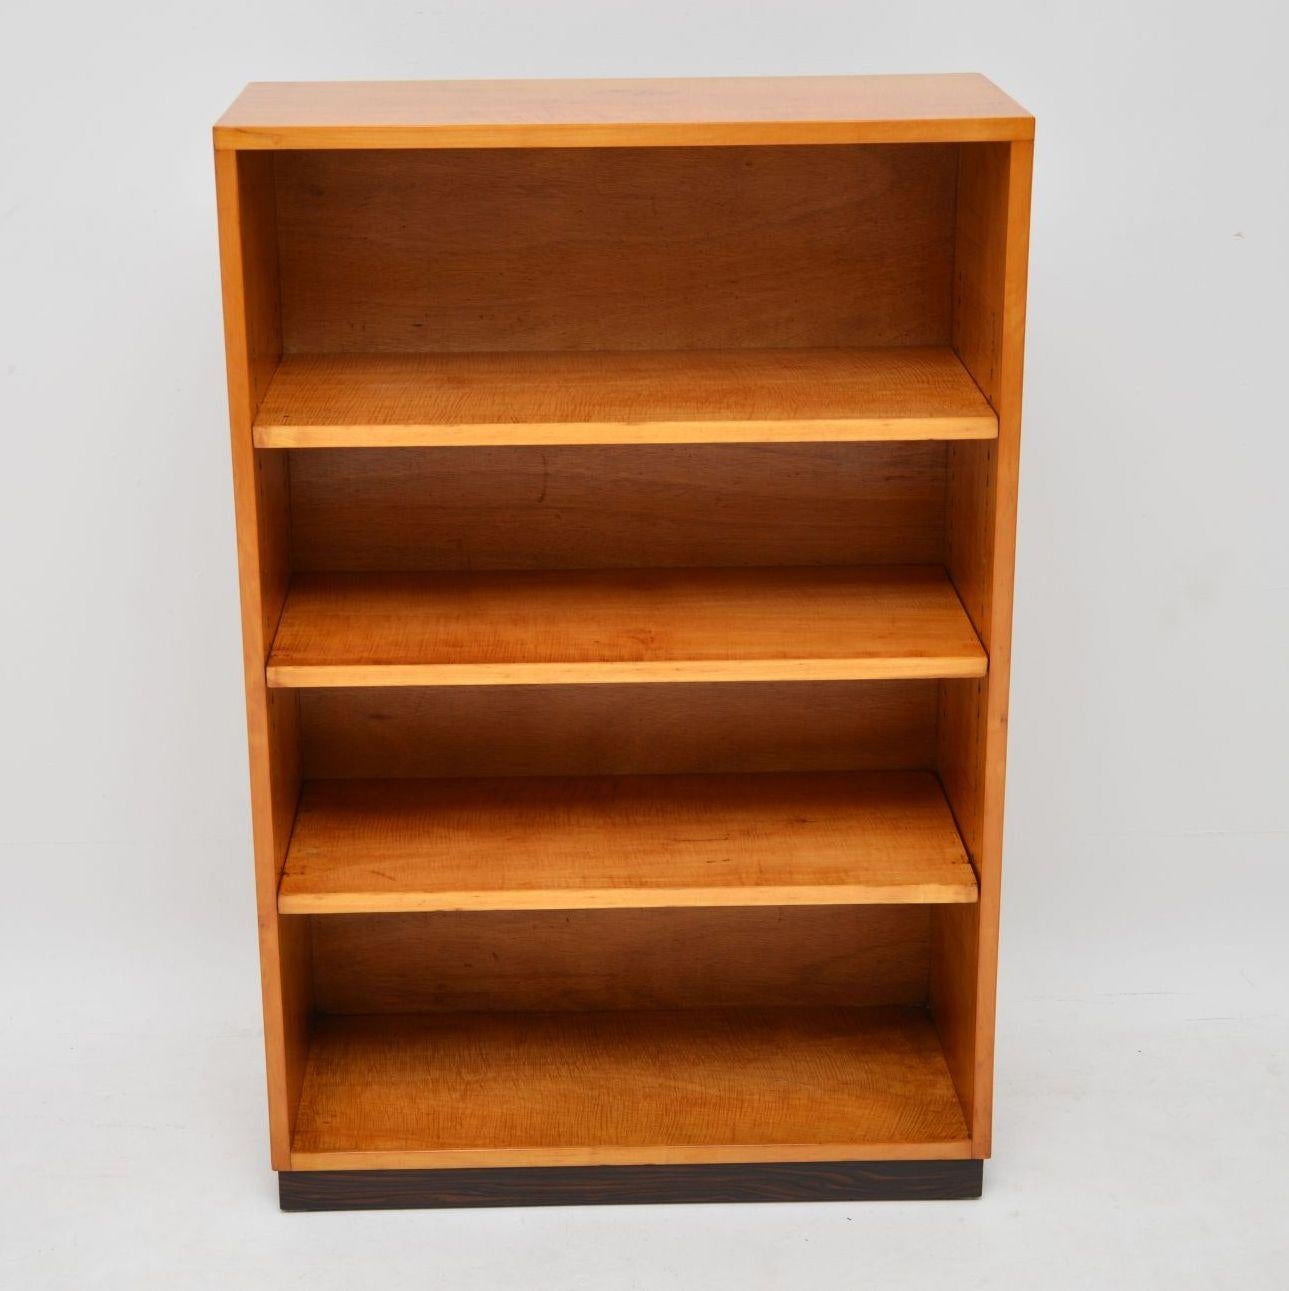 A stylish and extremely well made original Art Deco period bookcase dating from the 1920s-1930s. This is predominantly in beautiful satin birch, even on the inside and shelves; it sits on a rosewood base. We have had this fully stripped and